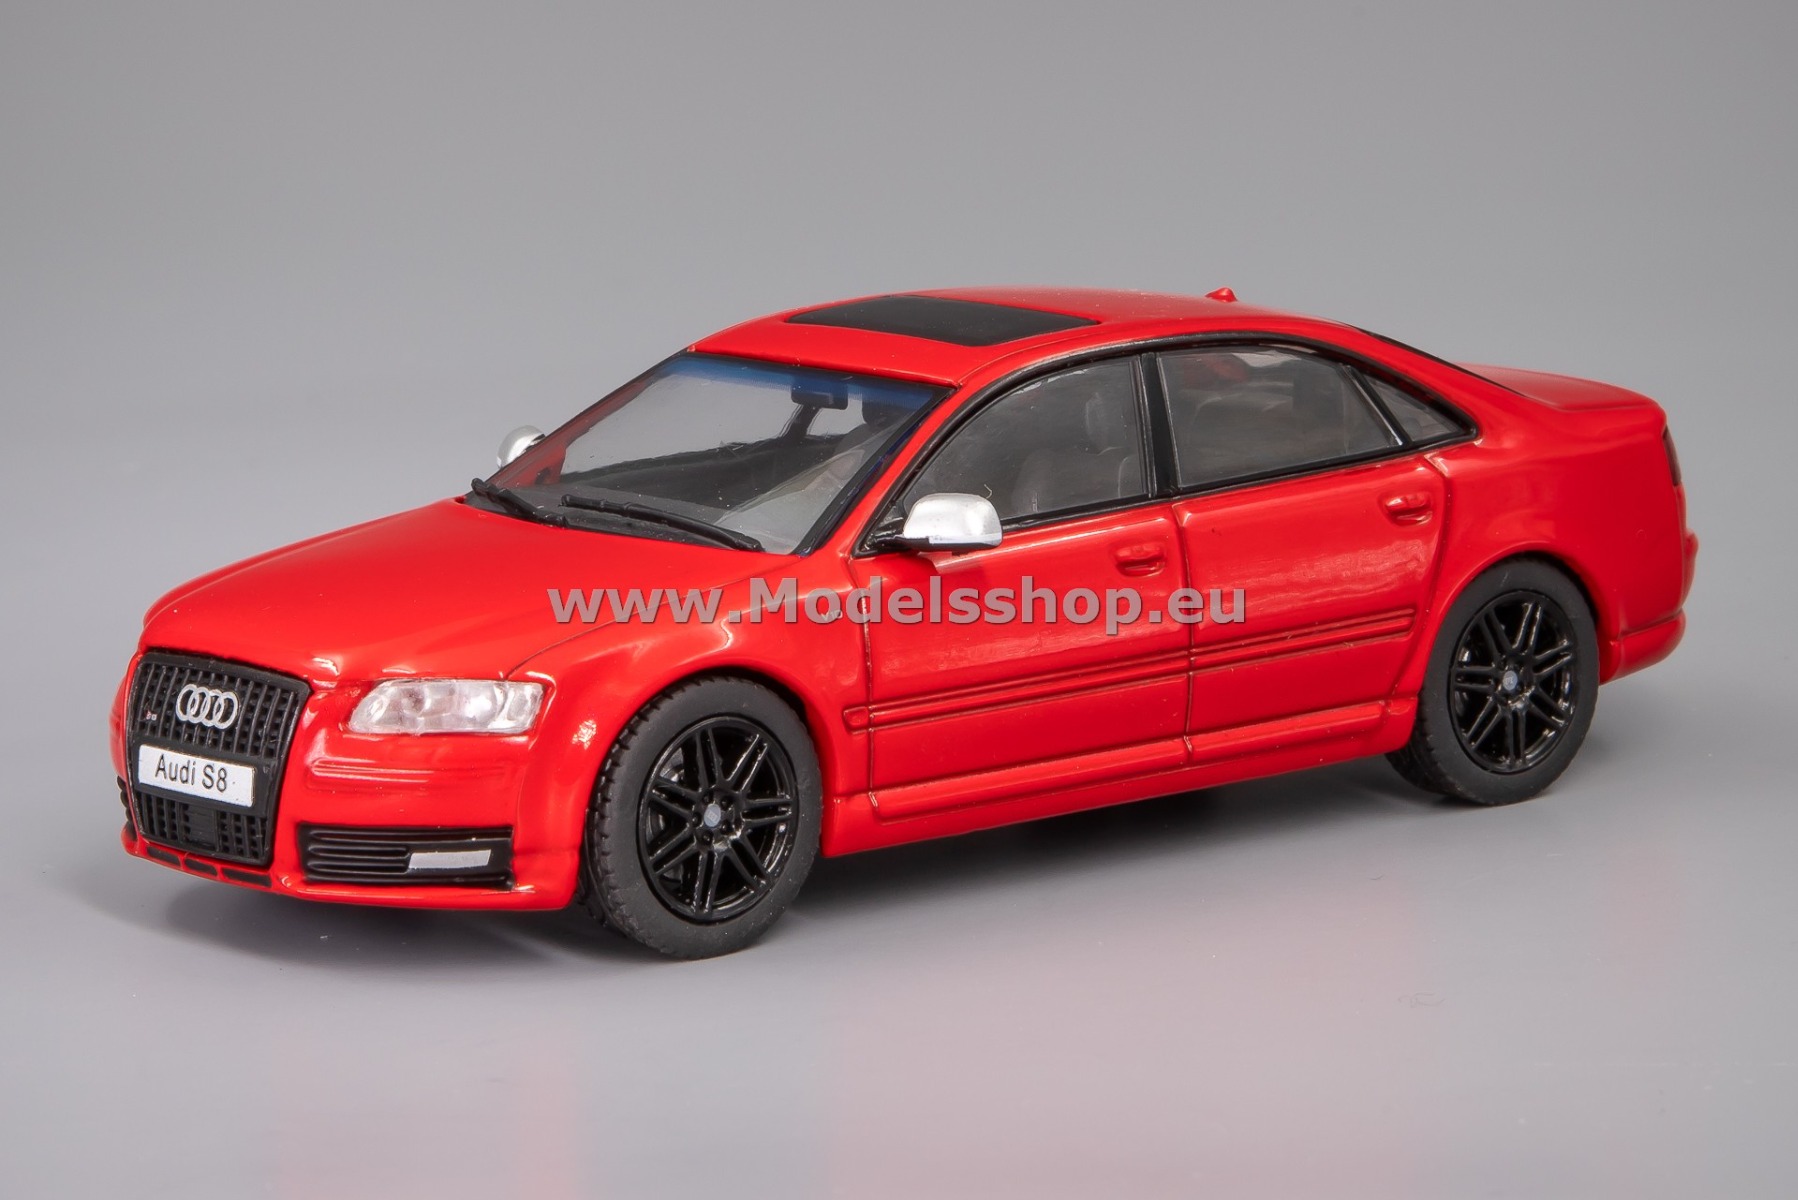 Solido S4313304 Audi S8 D3, 2010 /red/